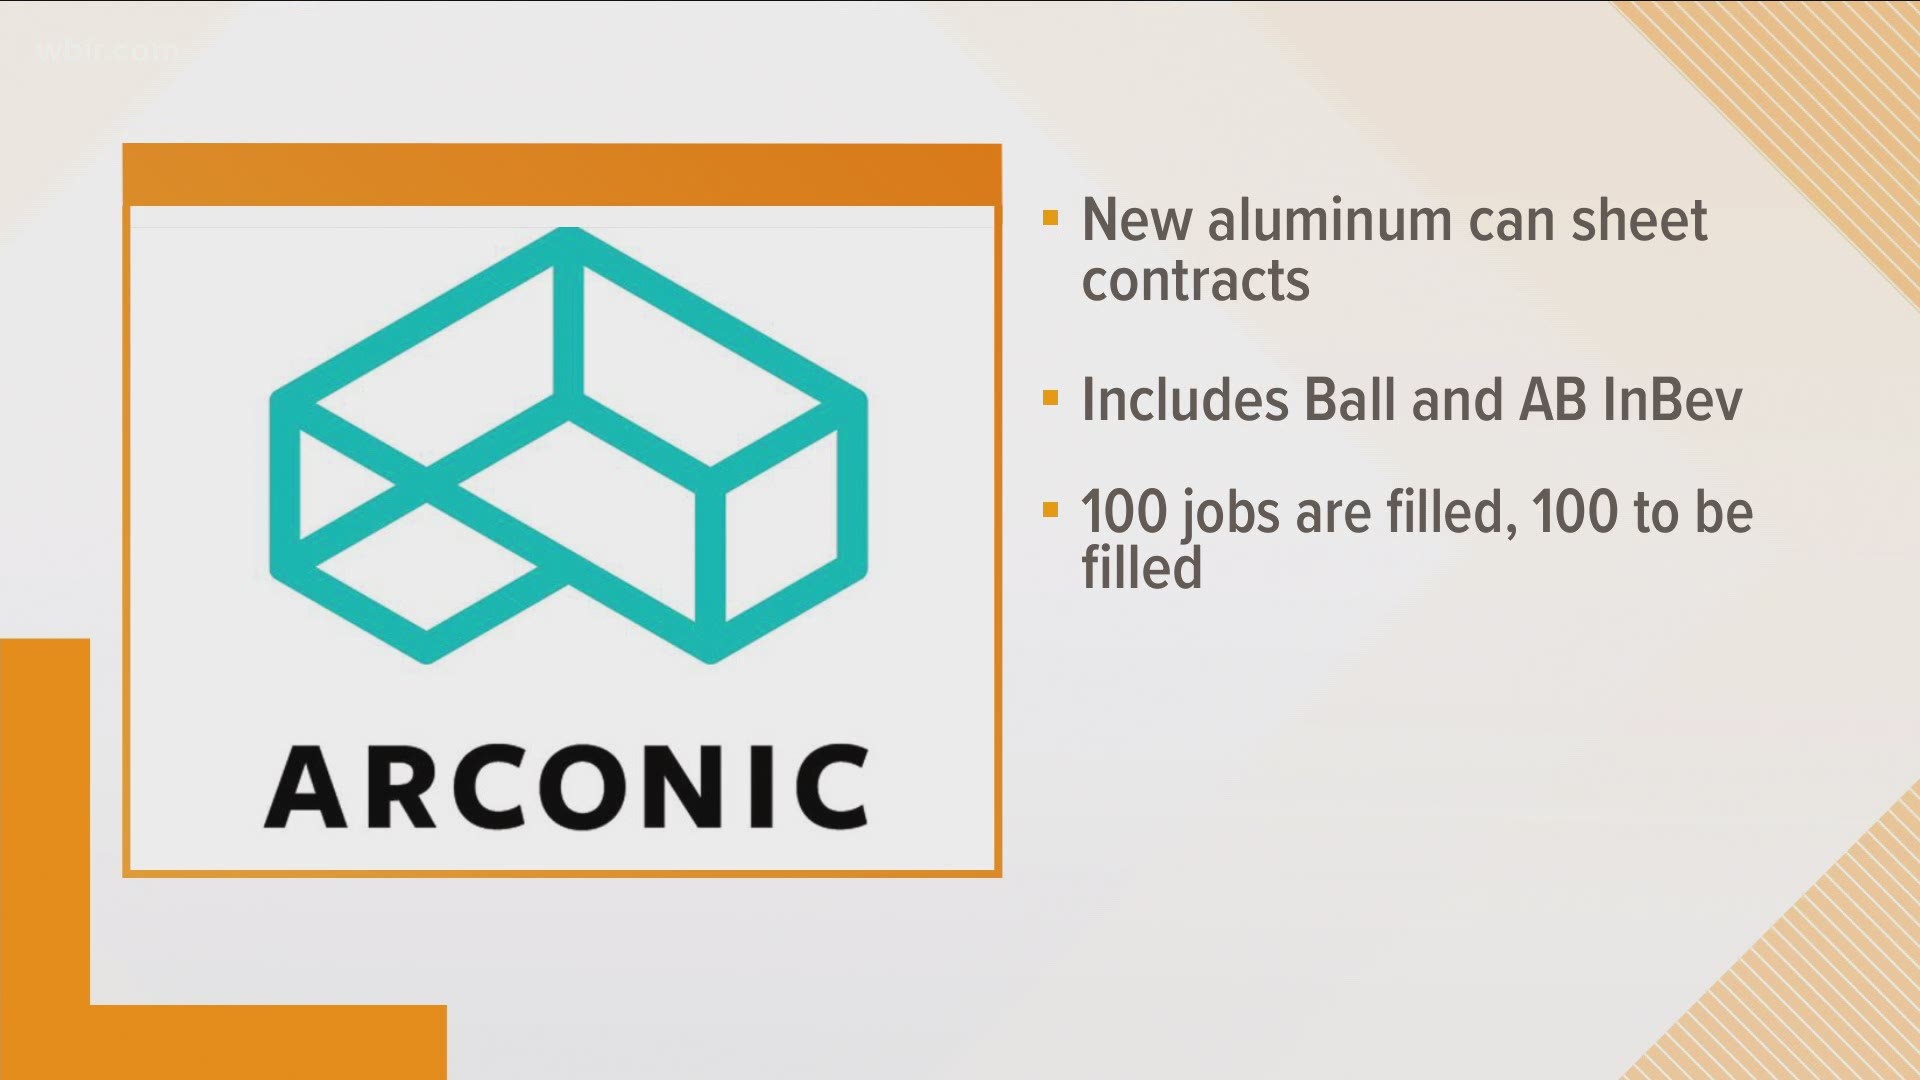 The Arconic Plant is adding the jobs thanks to new contracts for aluminum can sheets.